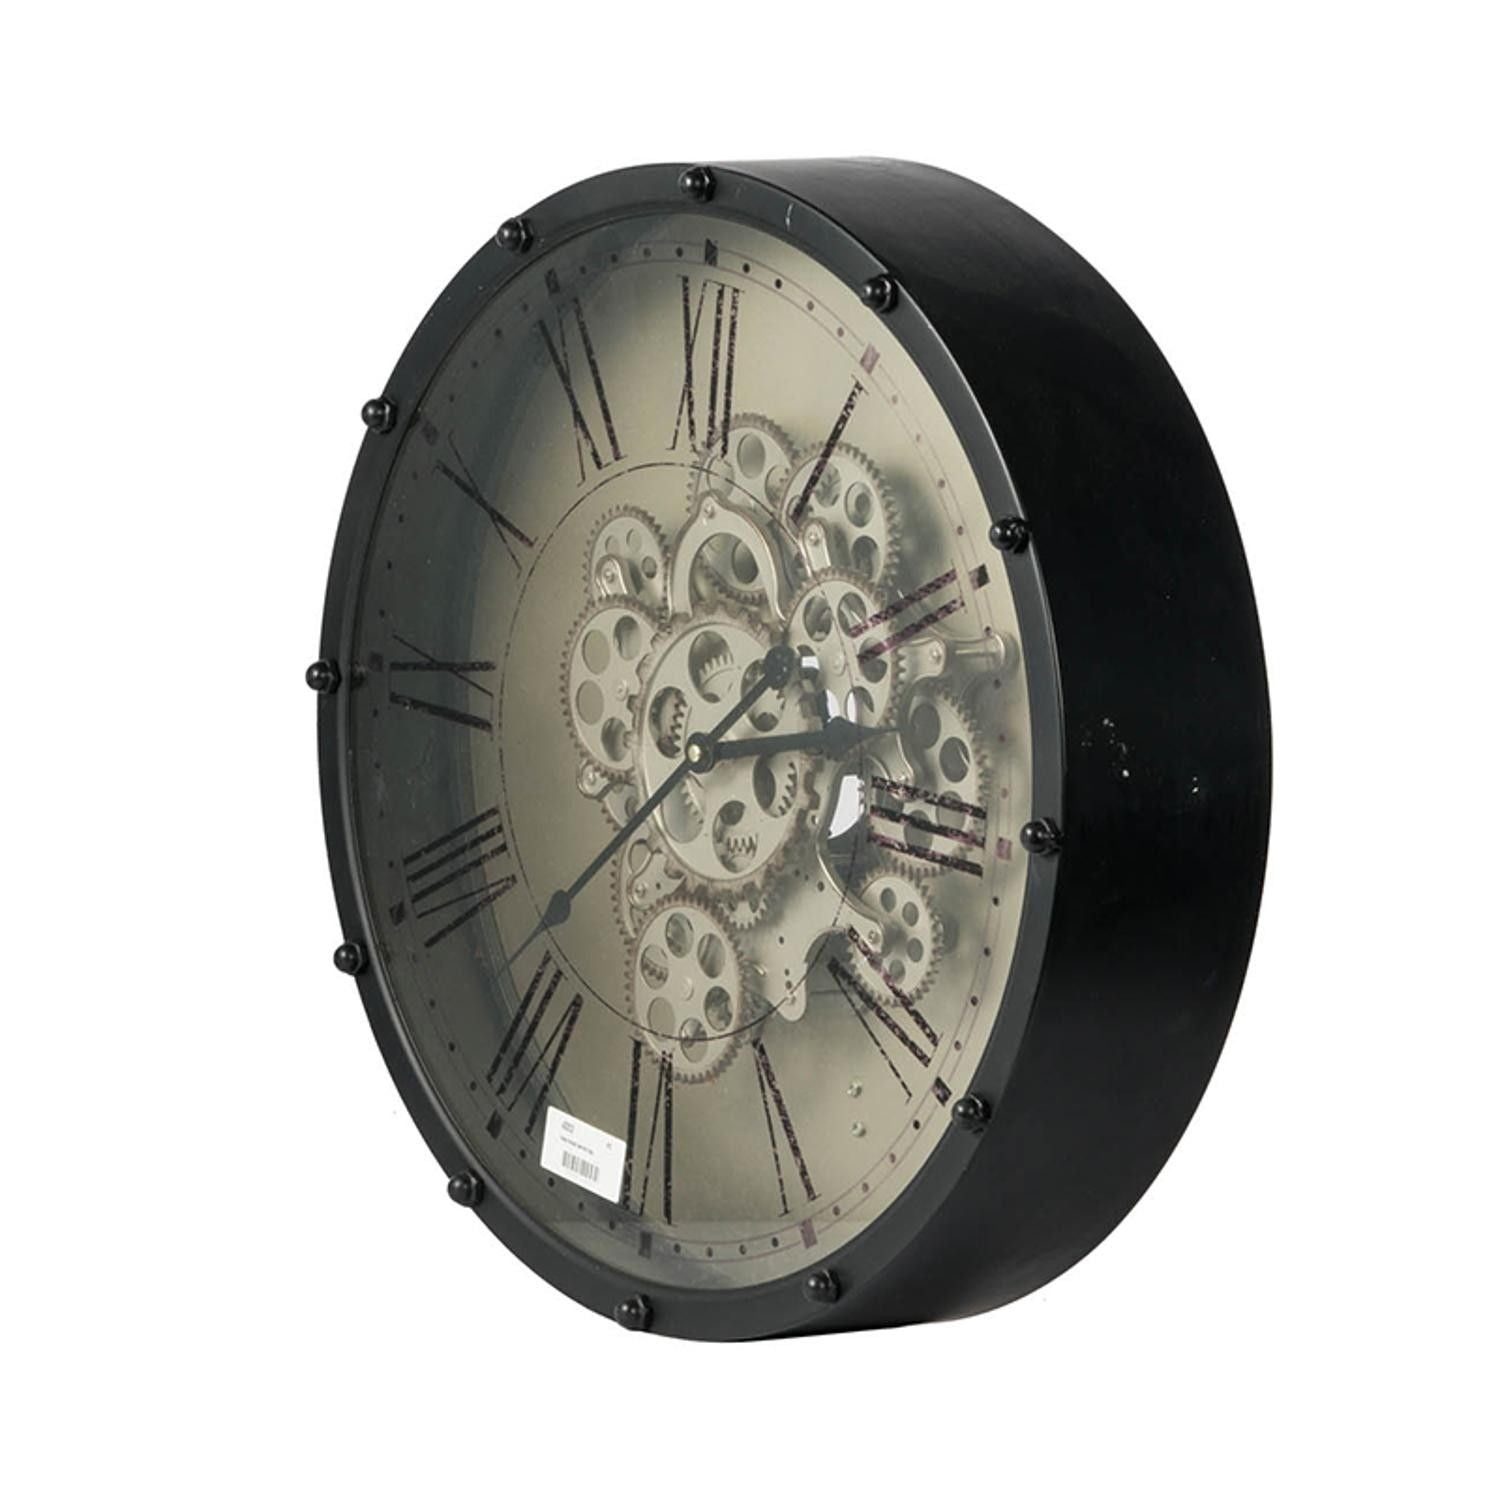 Vintage Gear Industrial Wall Clock - Black And Ivory